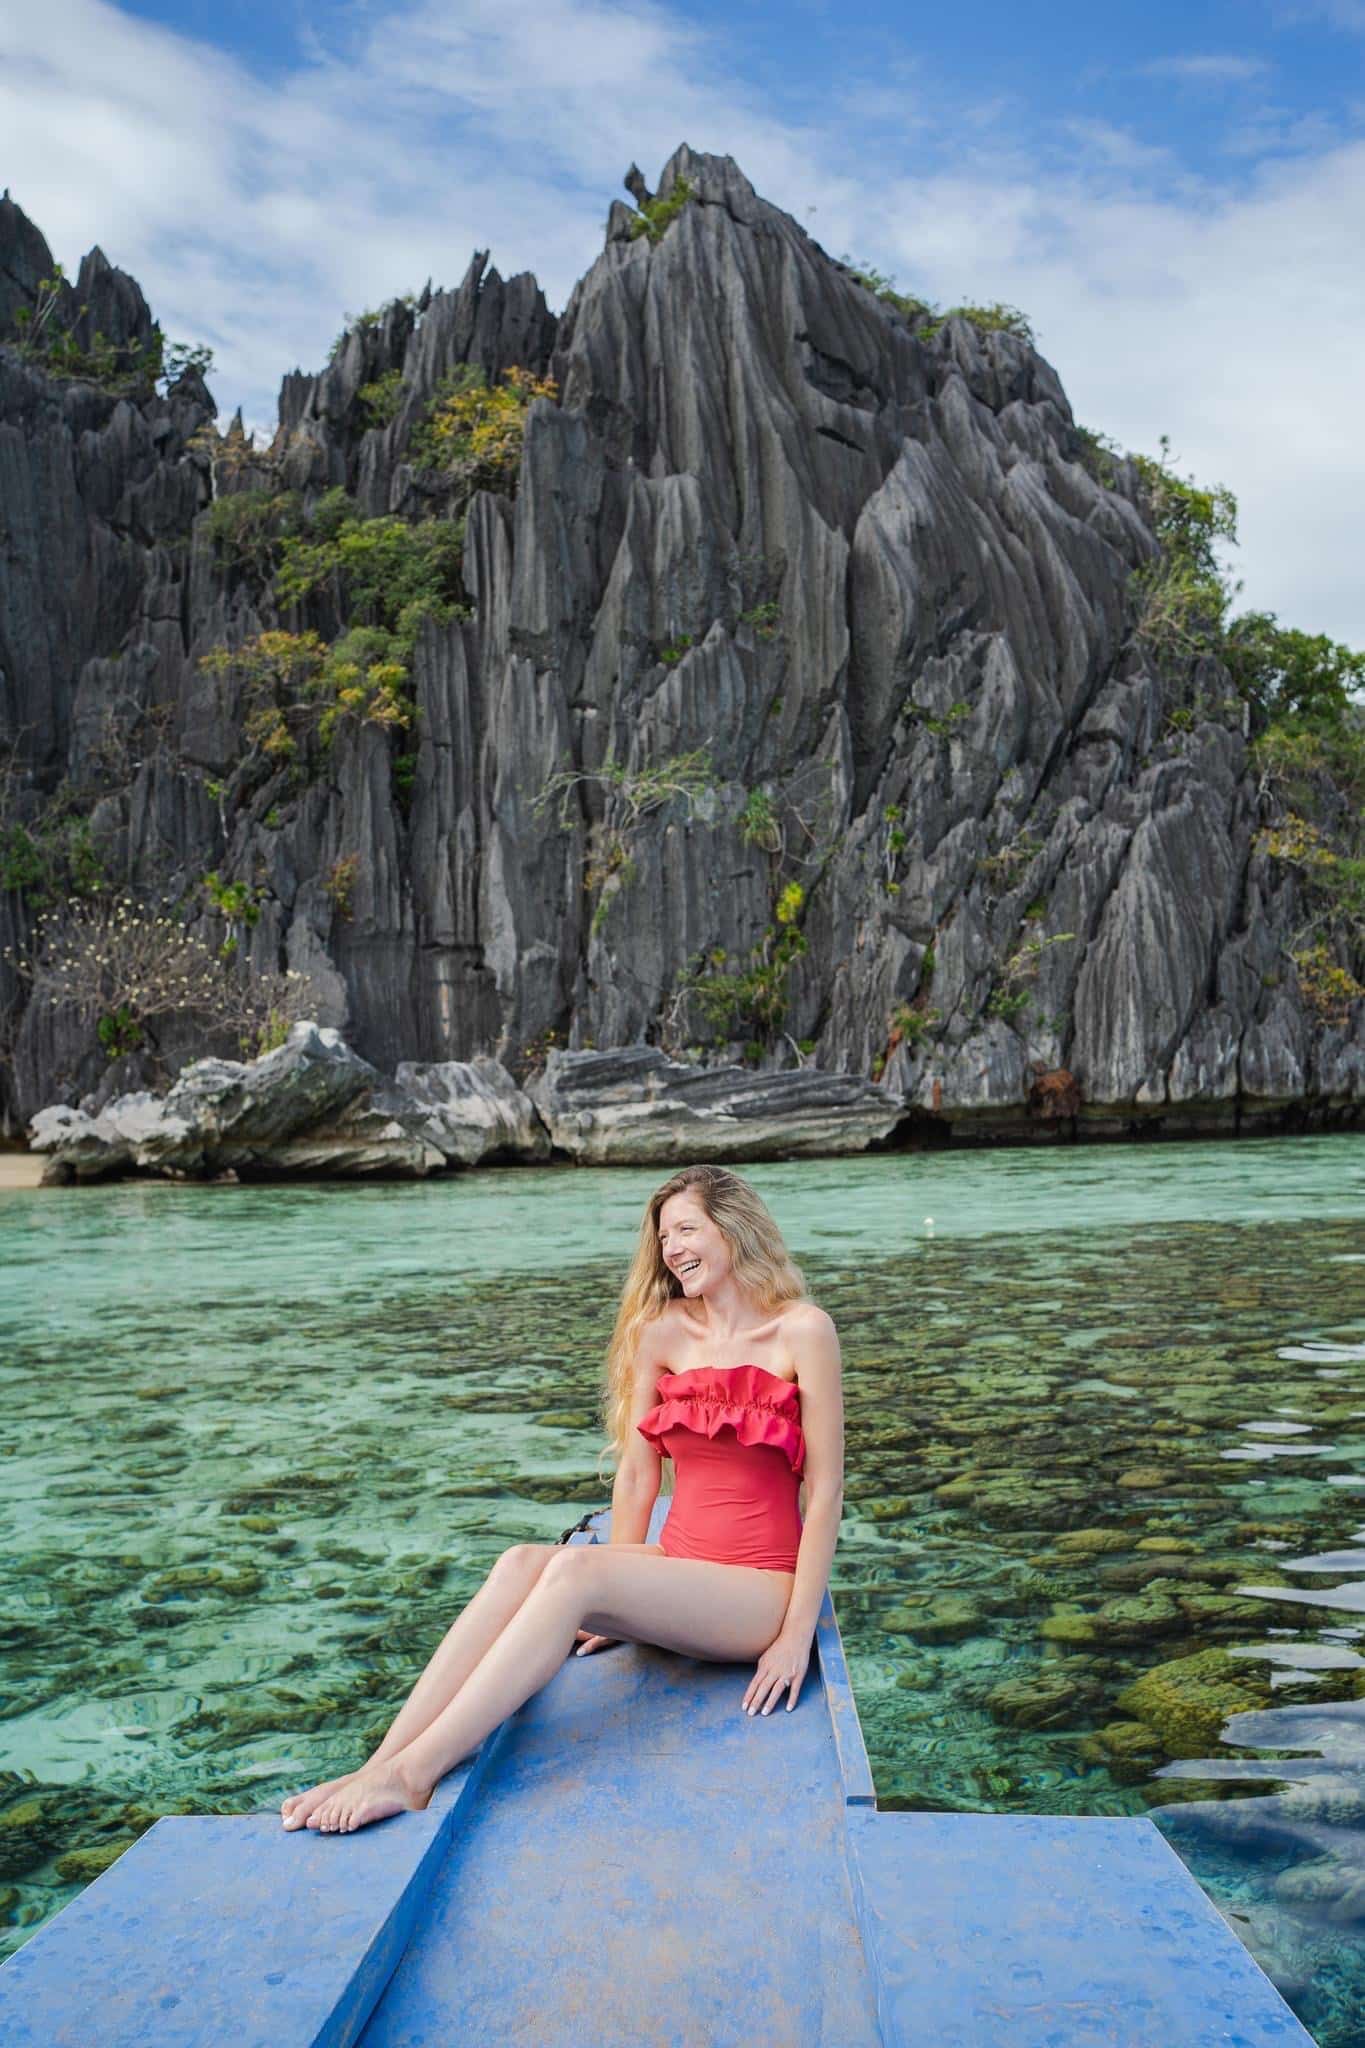 Twin-lagoon-top-spots-to-visit-coron-palawan-private-island-hopping-boat-tour-2